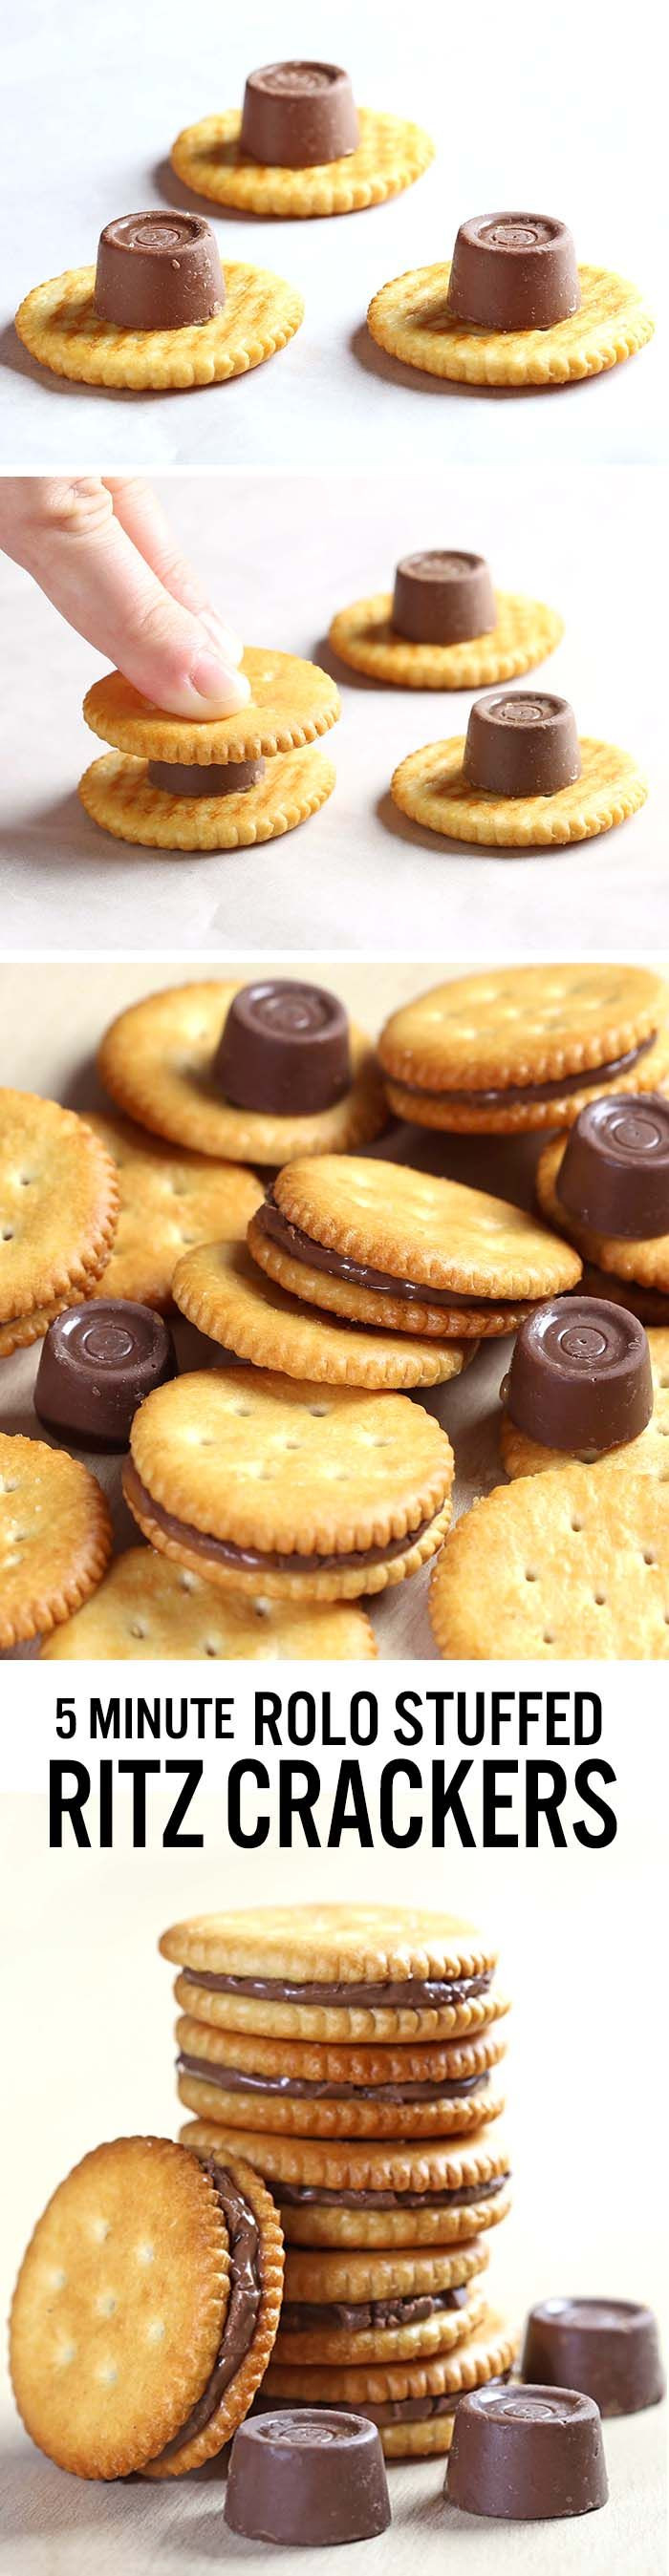 Are Ritz Crackers Healthy
 Rolo stuffed Ritz crackers – an awesomely easy to make